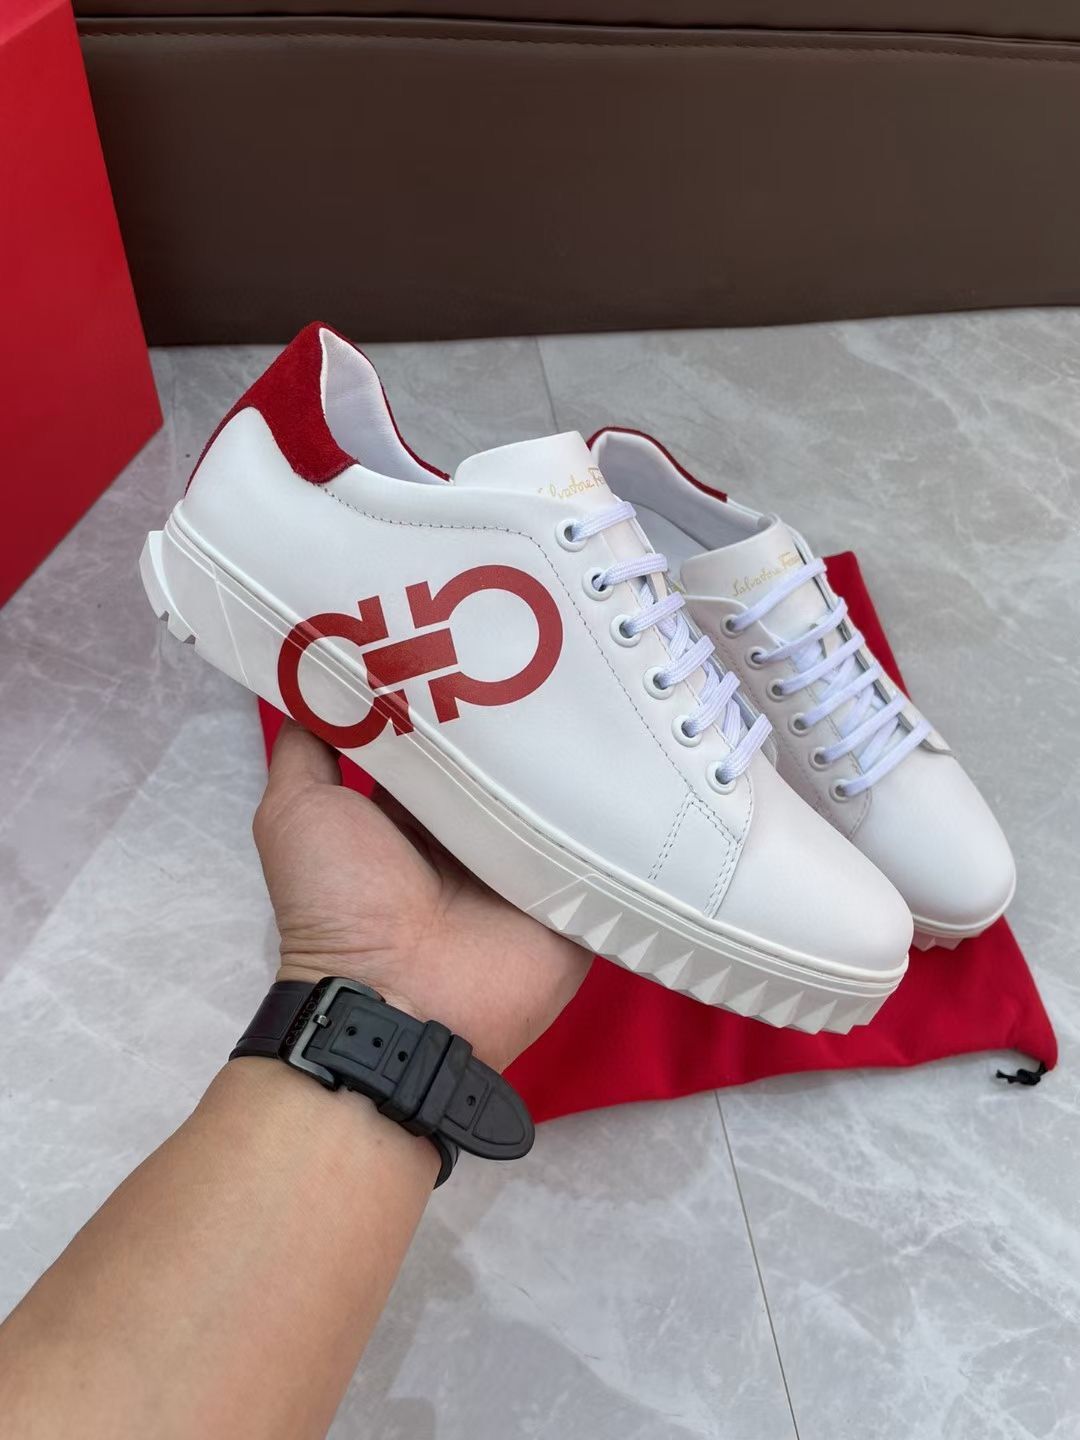 

High quality desugner men shoes luxury brand sneaker Low help goes all out color leisure shoe style up class are US38-45 asdawdasadas